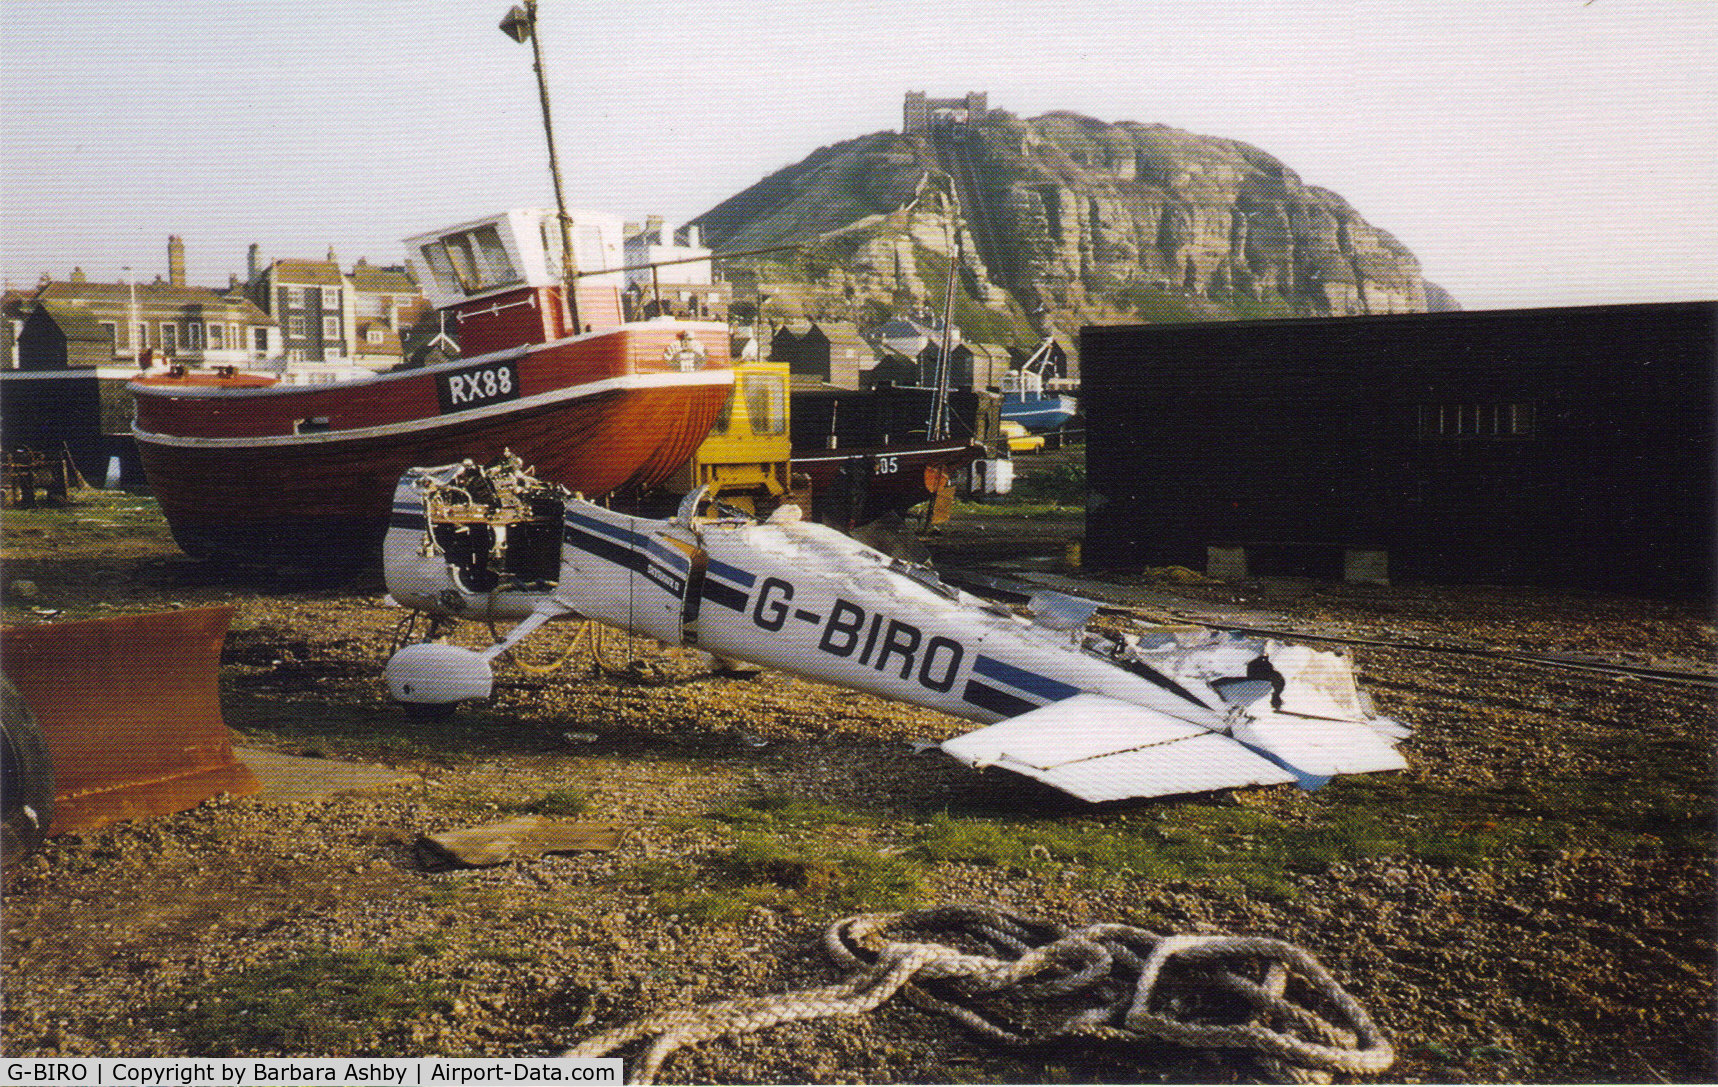 G-BIRO, 1981 Cessna 172P C/N 172-74826, The Stade, Old Town, Hastings.